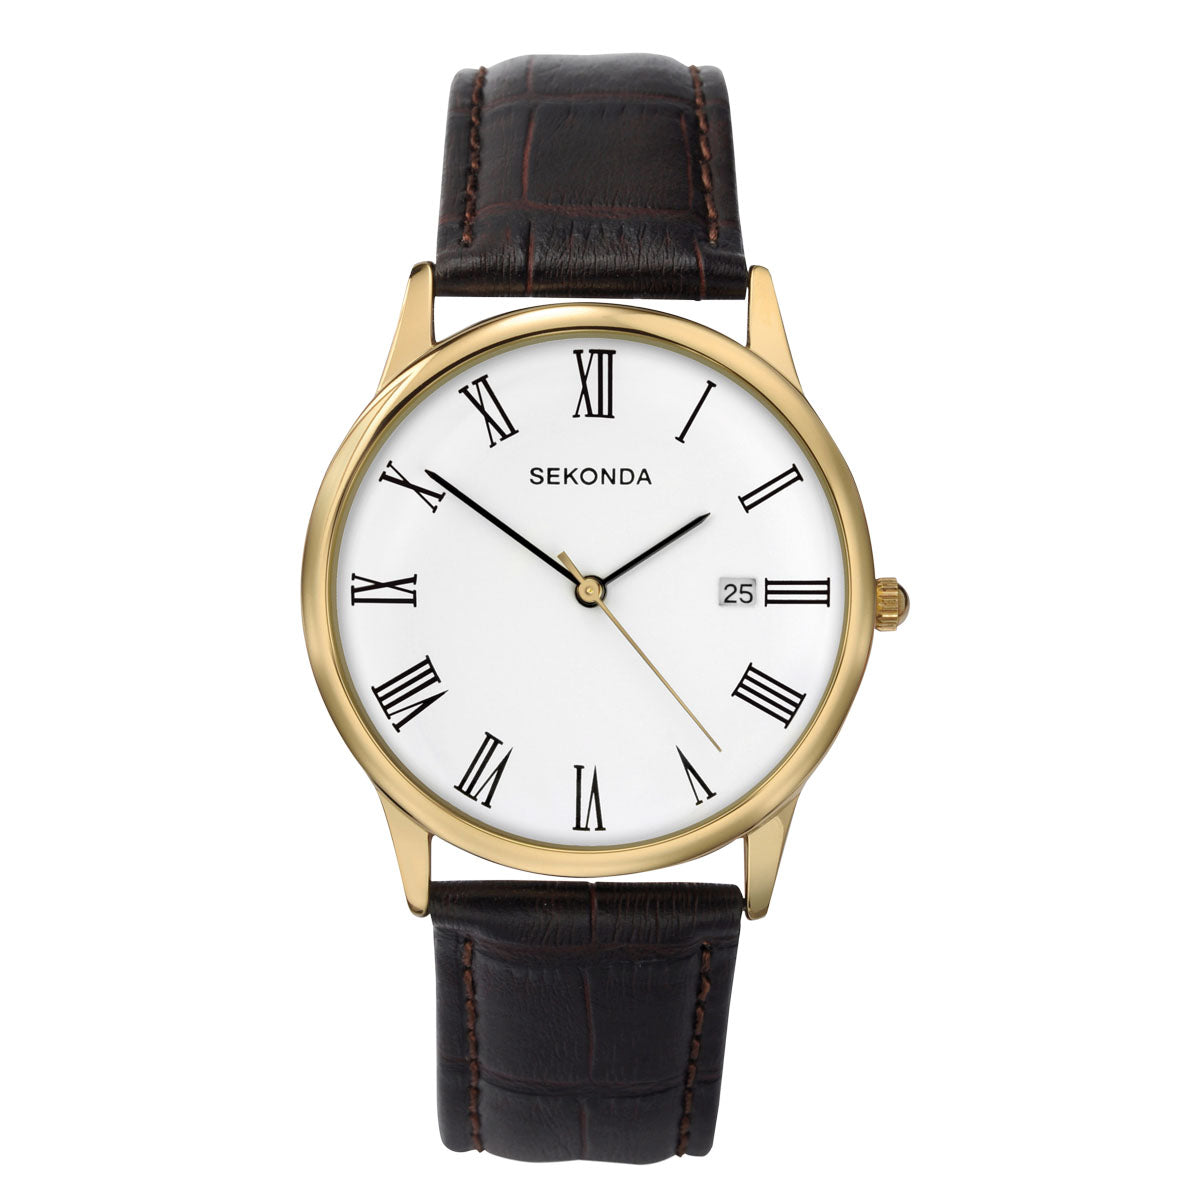 mens classic leather watch